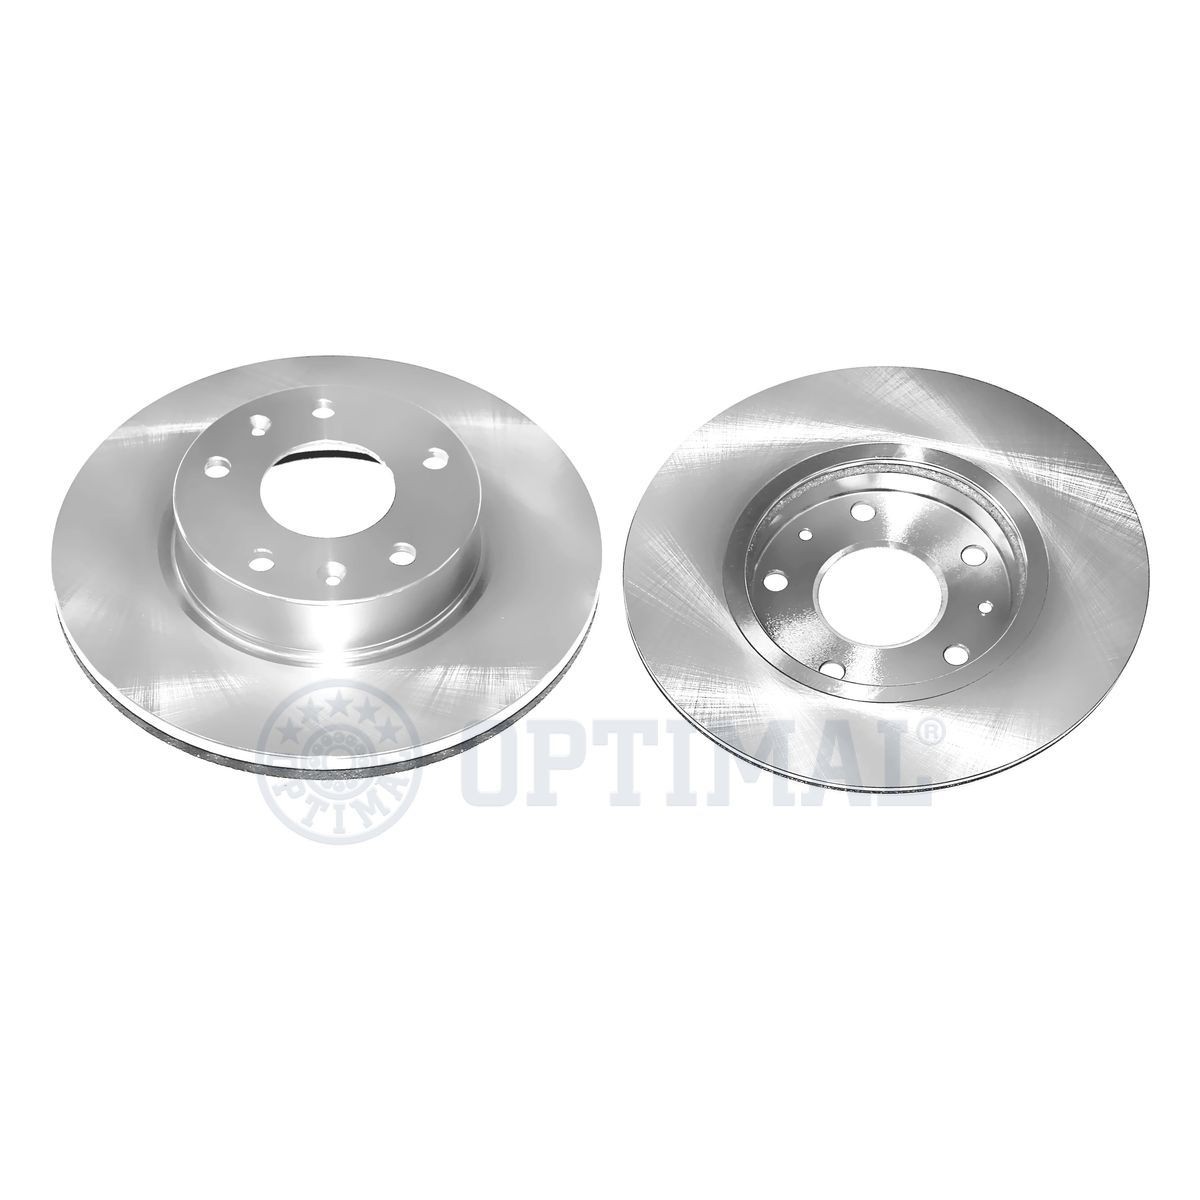 OPTIMAL Front Axle, 277x21mm, 5/7, Vented, Coated Ø: 277mm, Brake Disc Thickness: 21mm Brake rotor BS-7730C buy